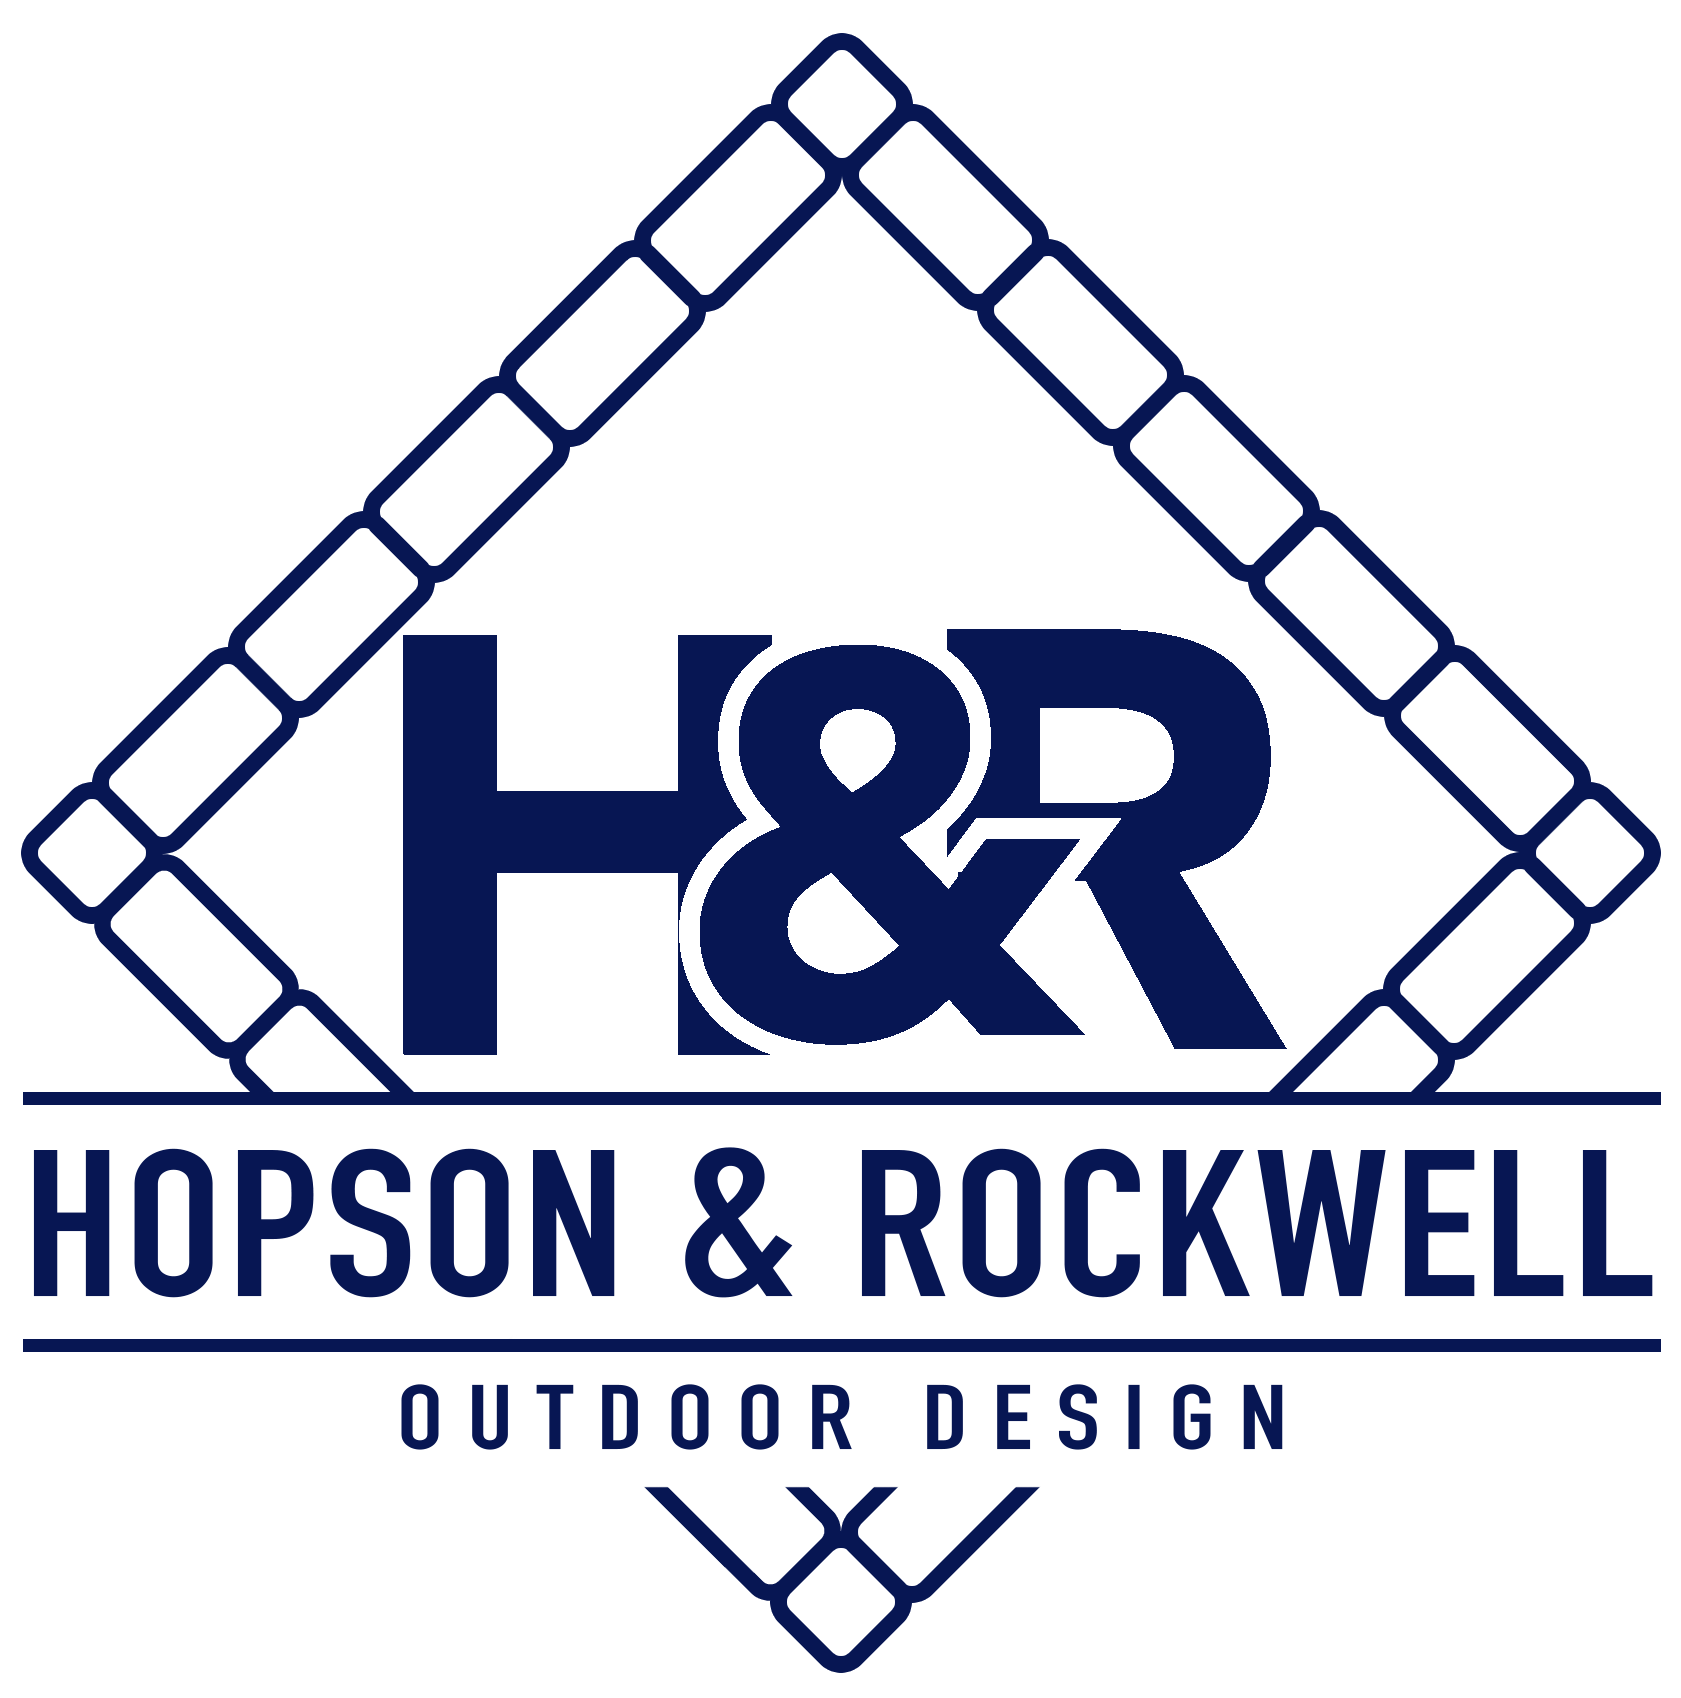 Hopson & Rockwell Outdoor Design